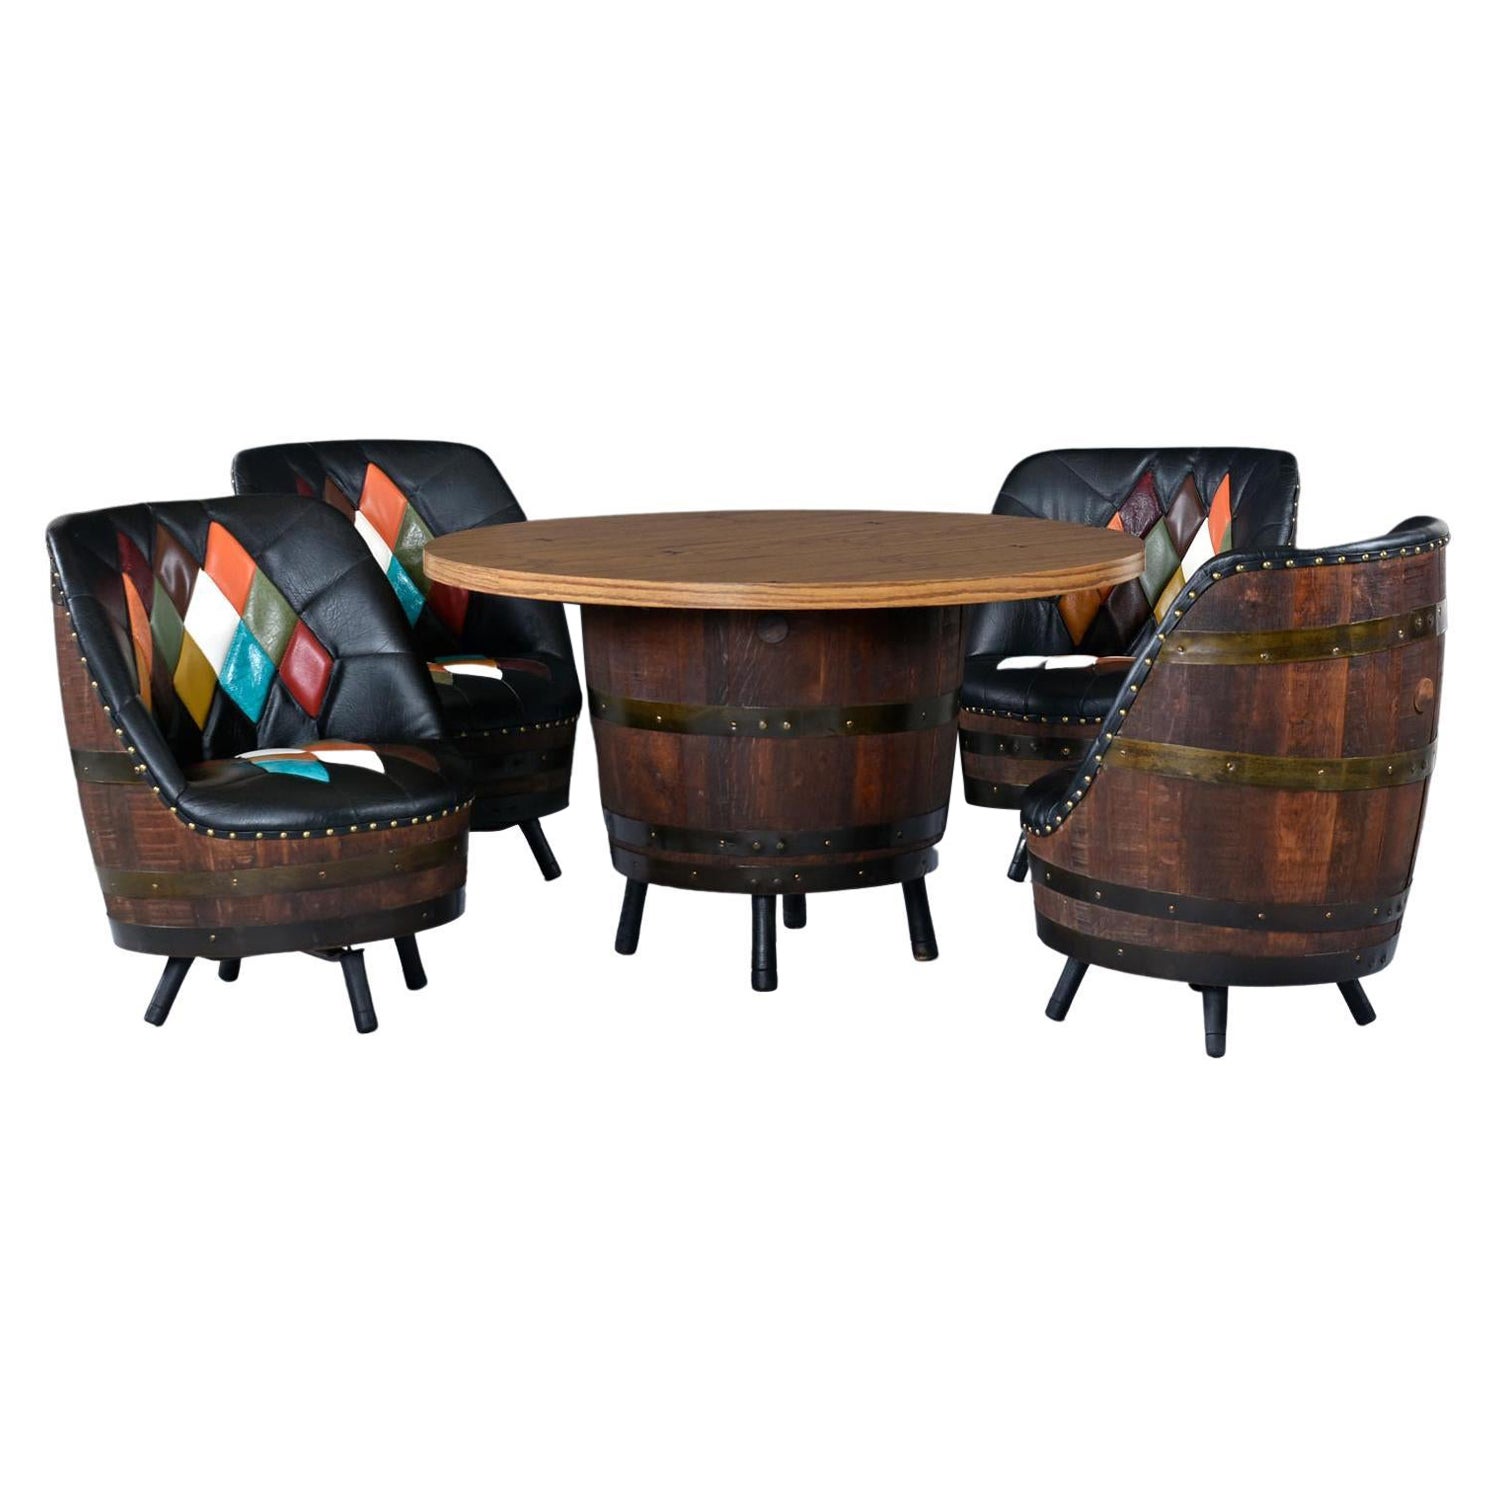 Brothers Furniture Harlequin Whiskey Barrel Gaming Table and Swivel Chairs Set